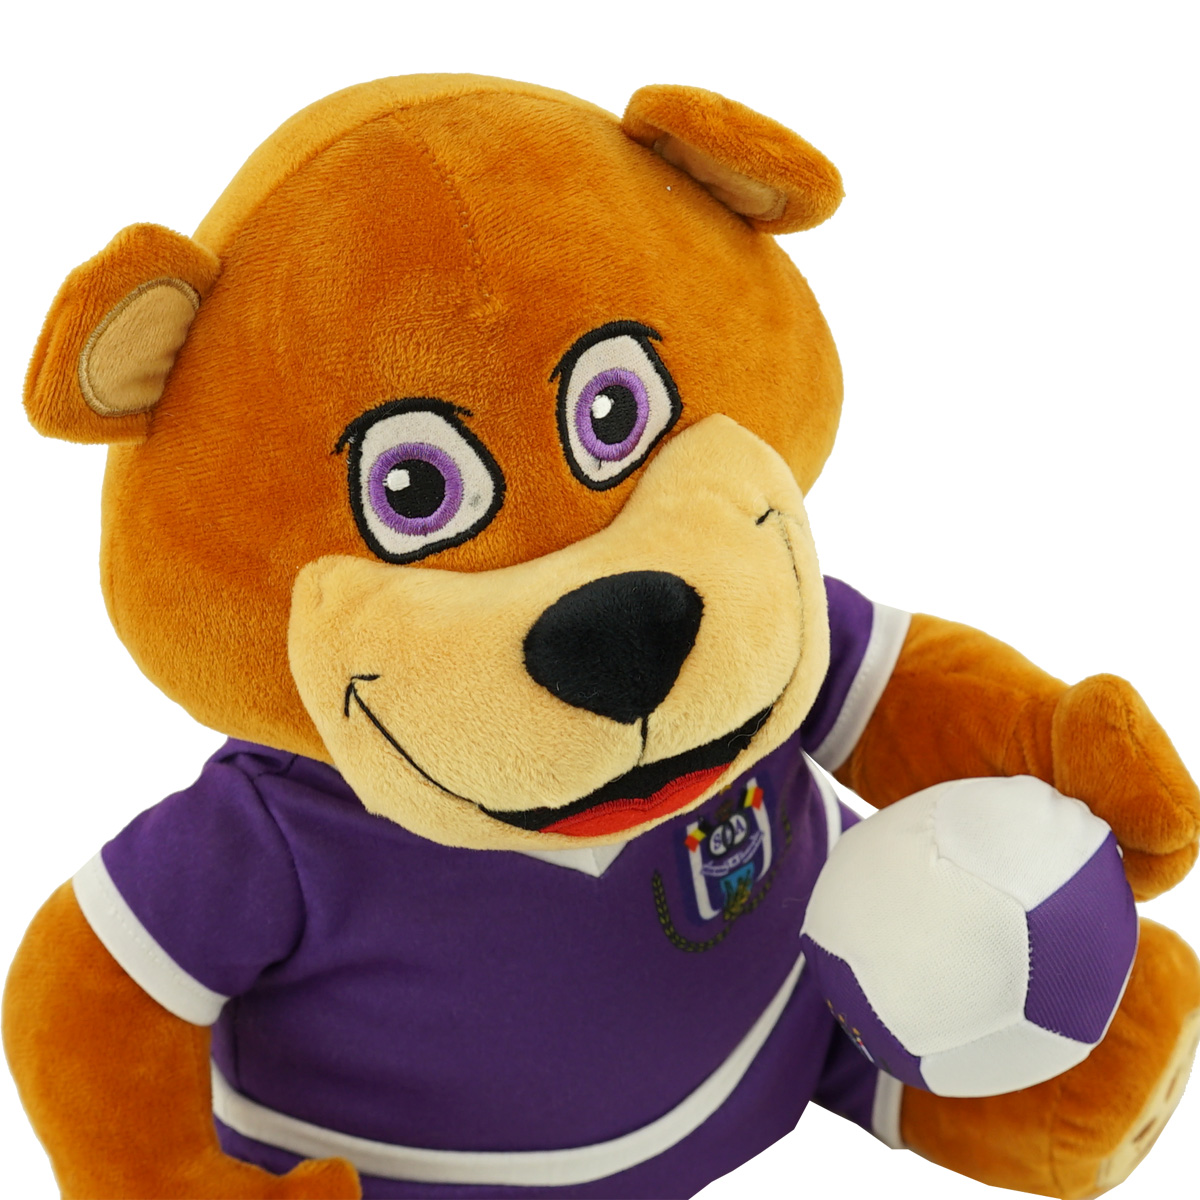 RSCA Cuddly Bear is-hover